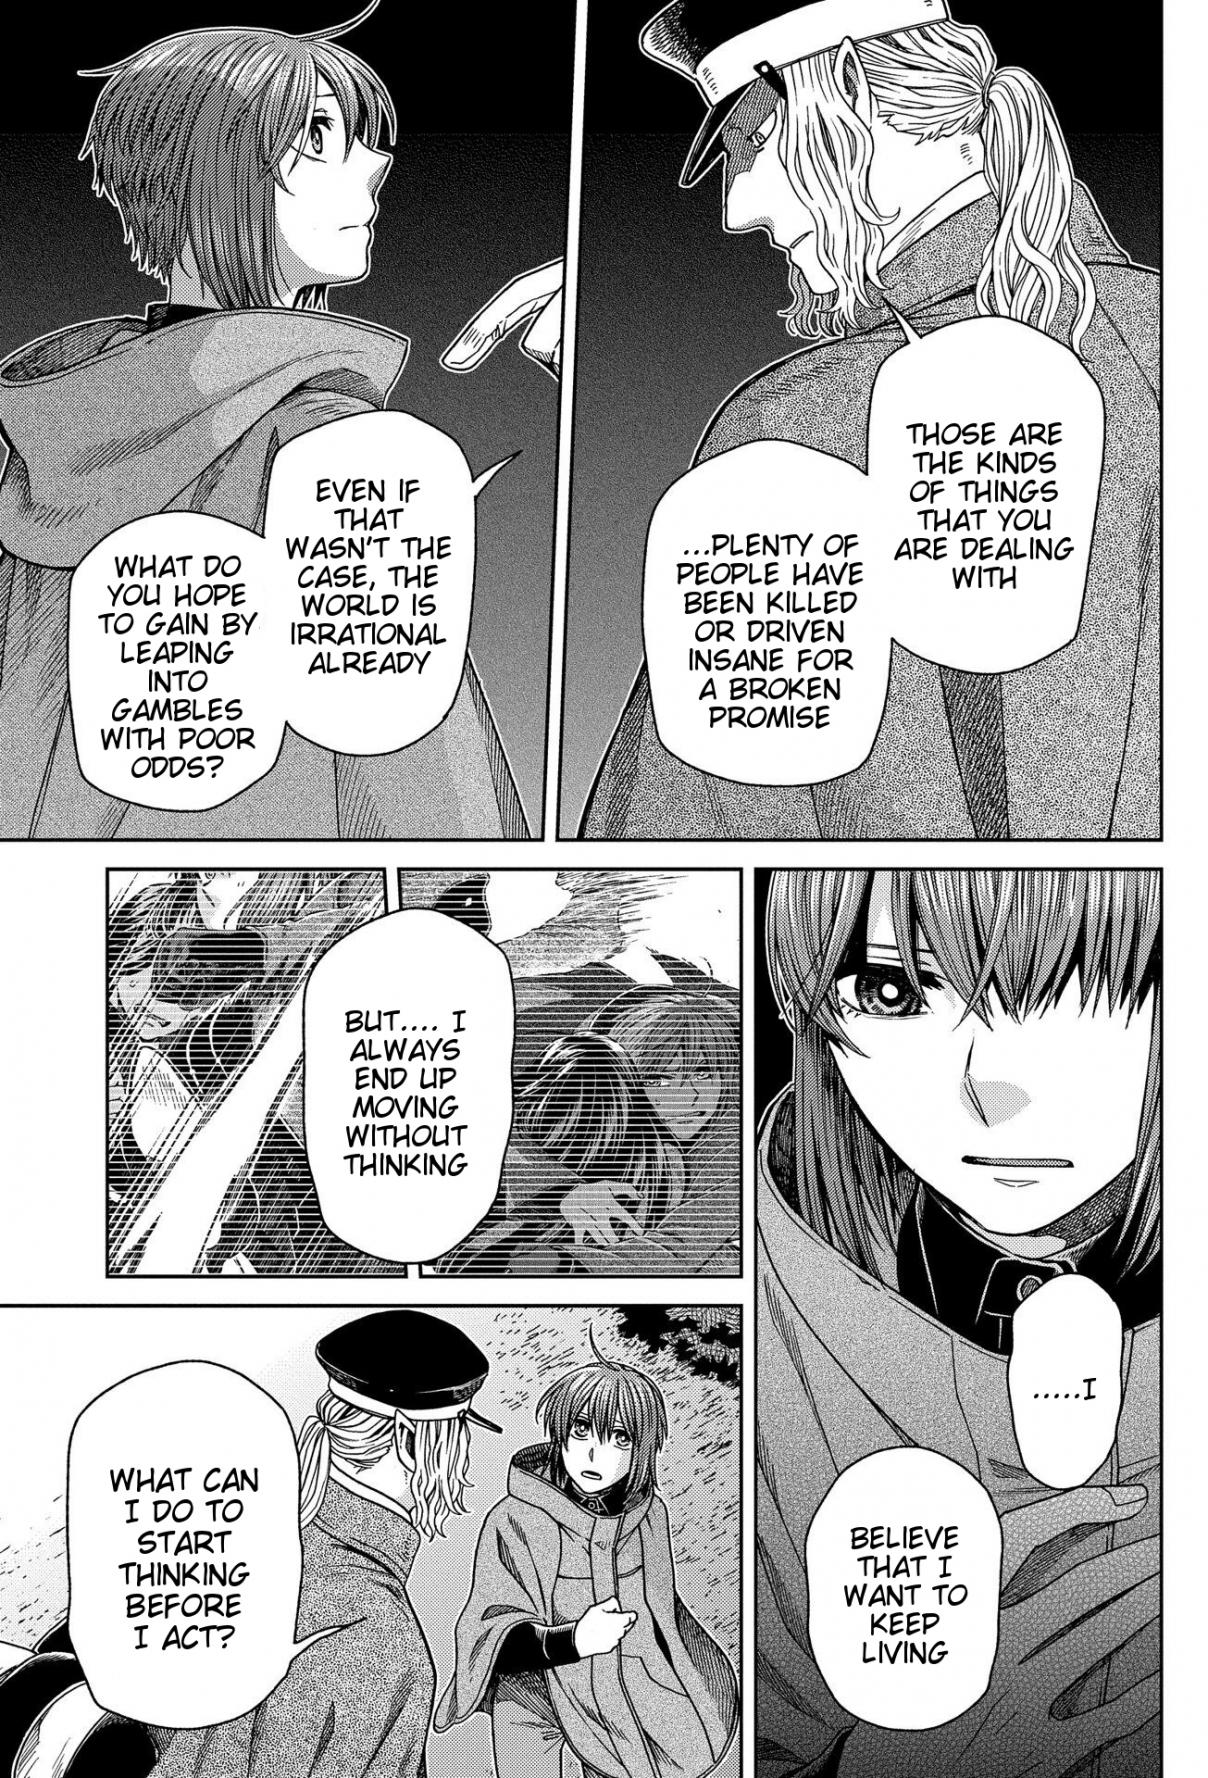 The Ancient Magus' Bride Vol. 14 Ch. 67 A small leak will sink a great ship. II